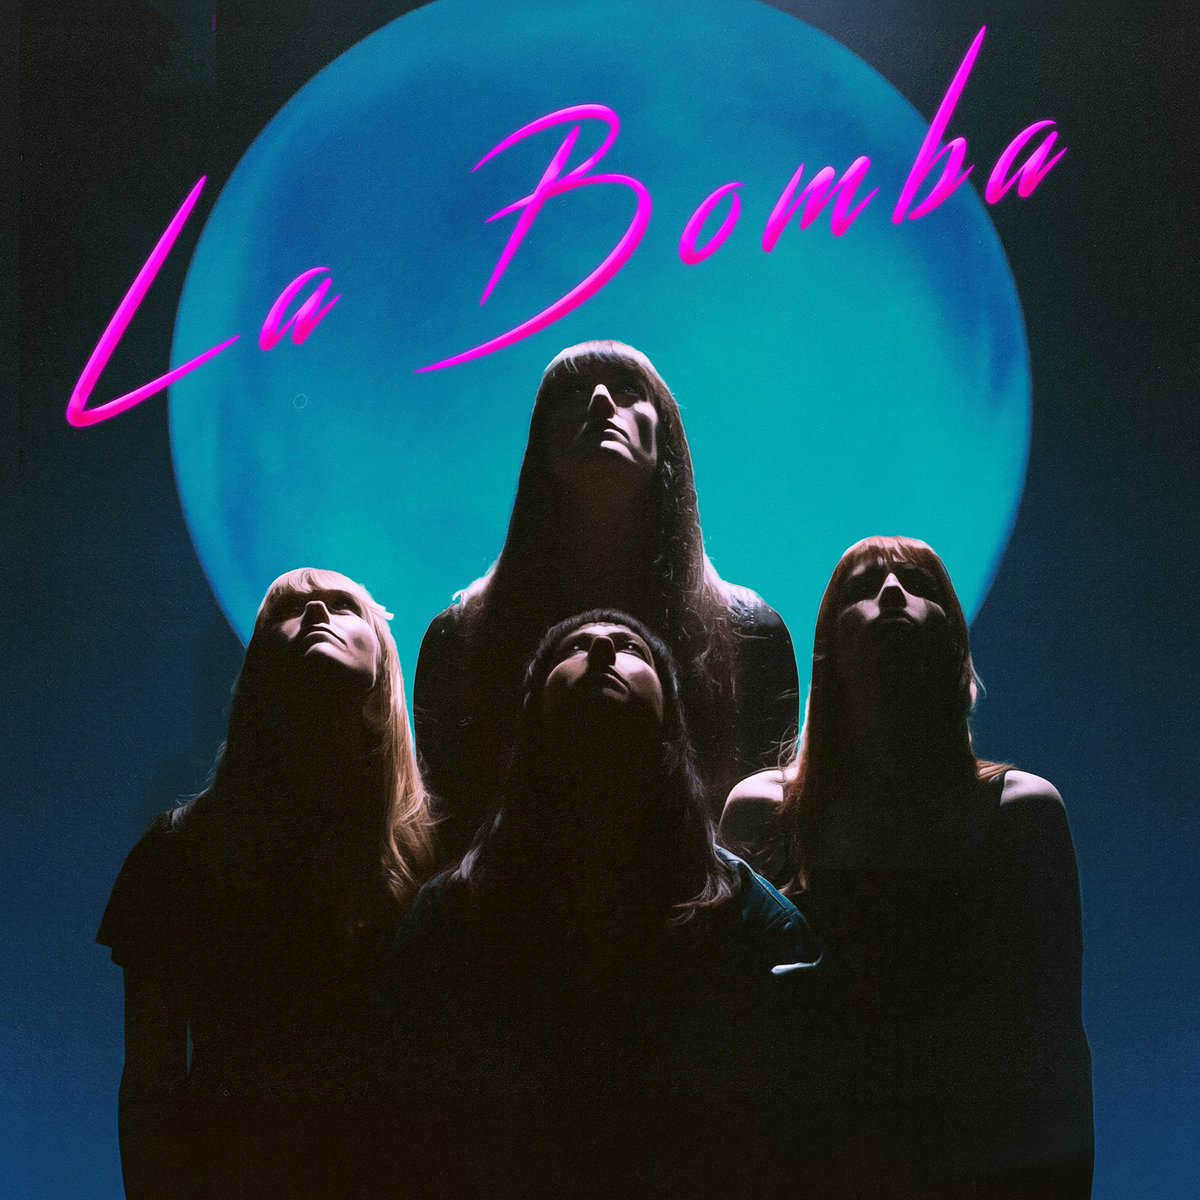 It’s happening…… Our new single La Bomba is coming out this Wednesday🔥. Make sure to PRE-SAVE 👉🏽 losbitchos.lnk.to/LaBomba and be the first to hear it. Are you ready? LET’S GO 😝 Cover and artwork by @tommitchellphoto 🖤